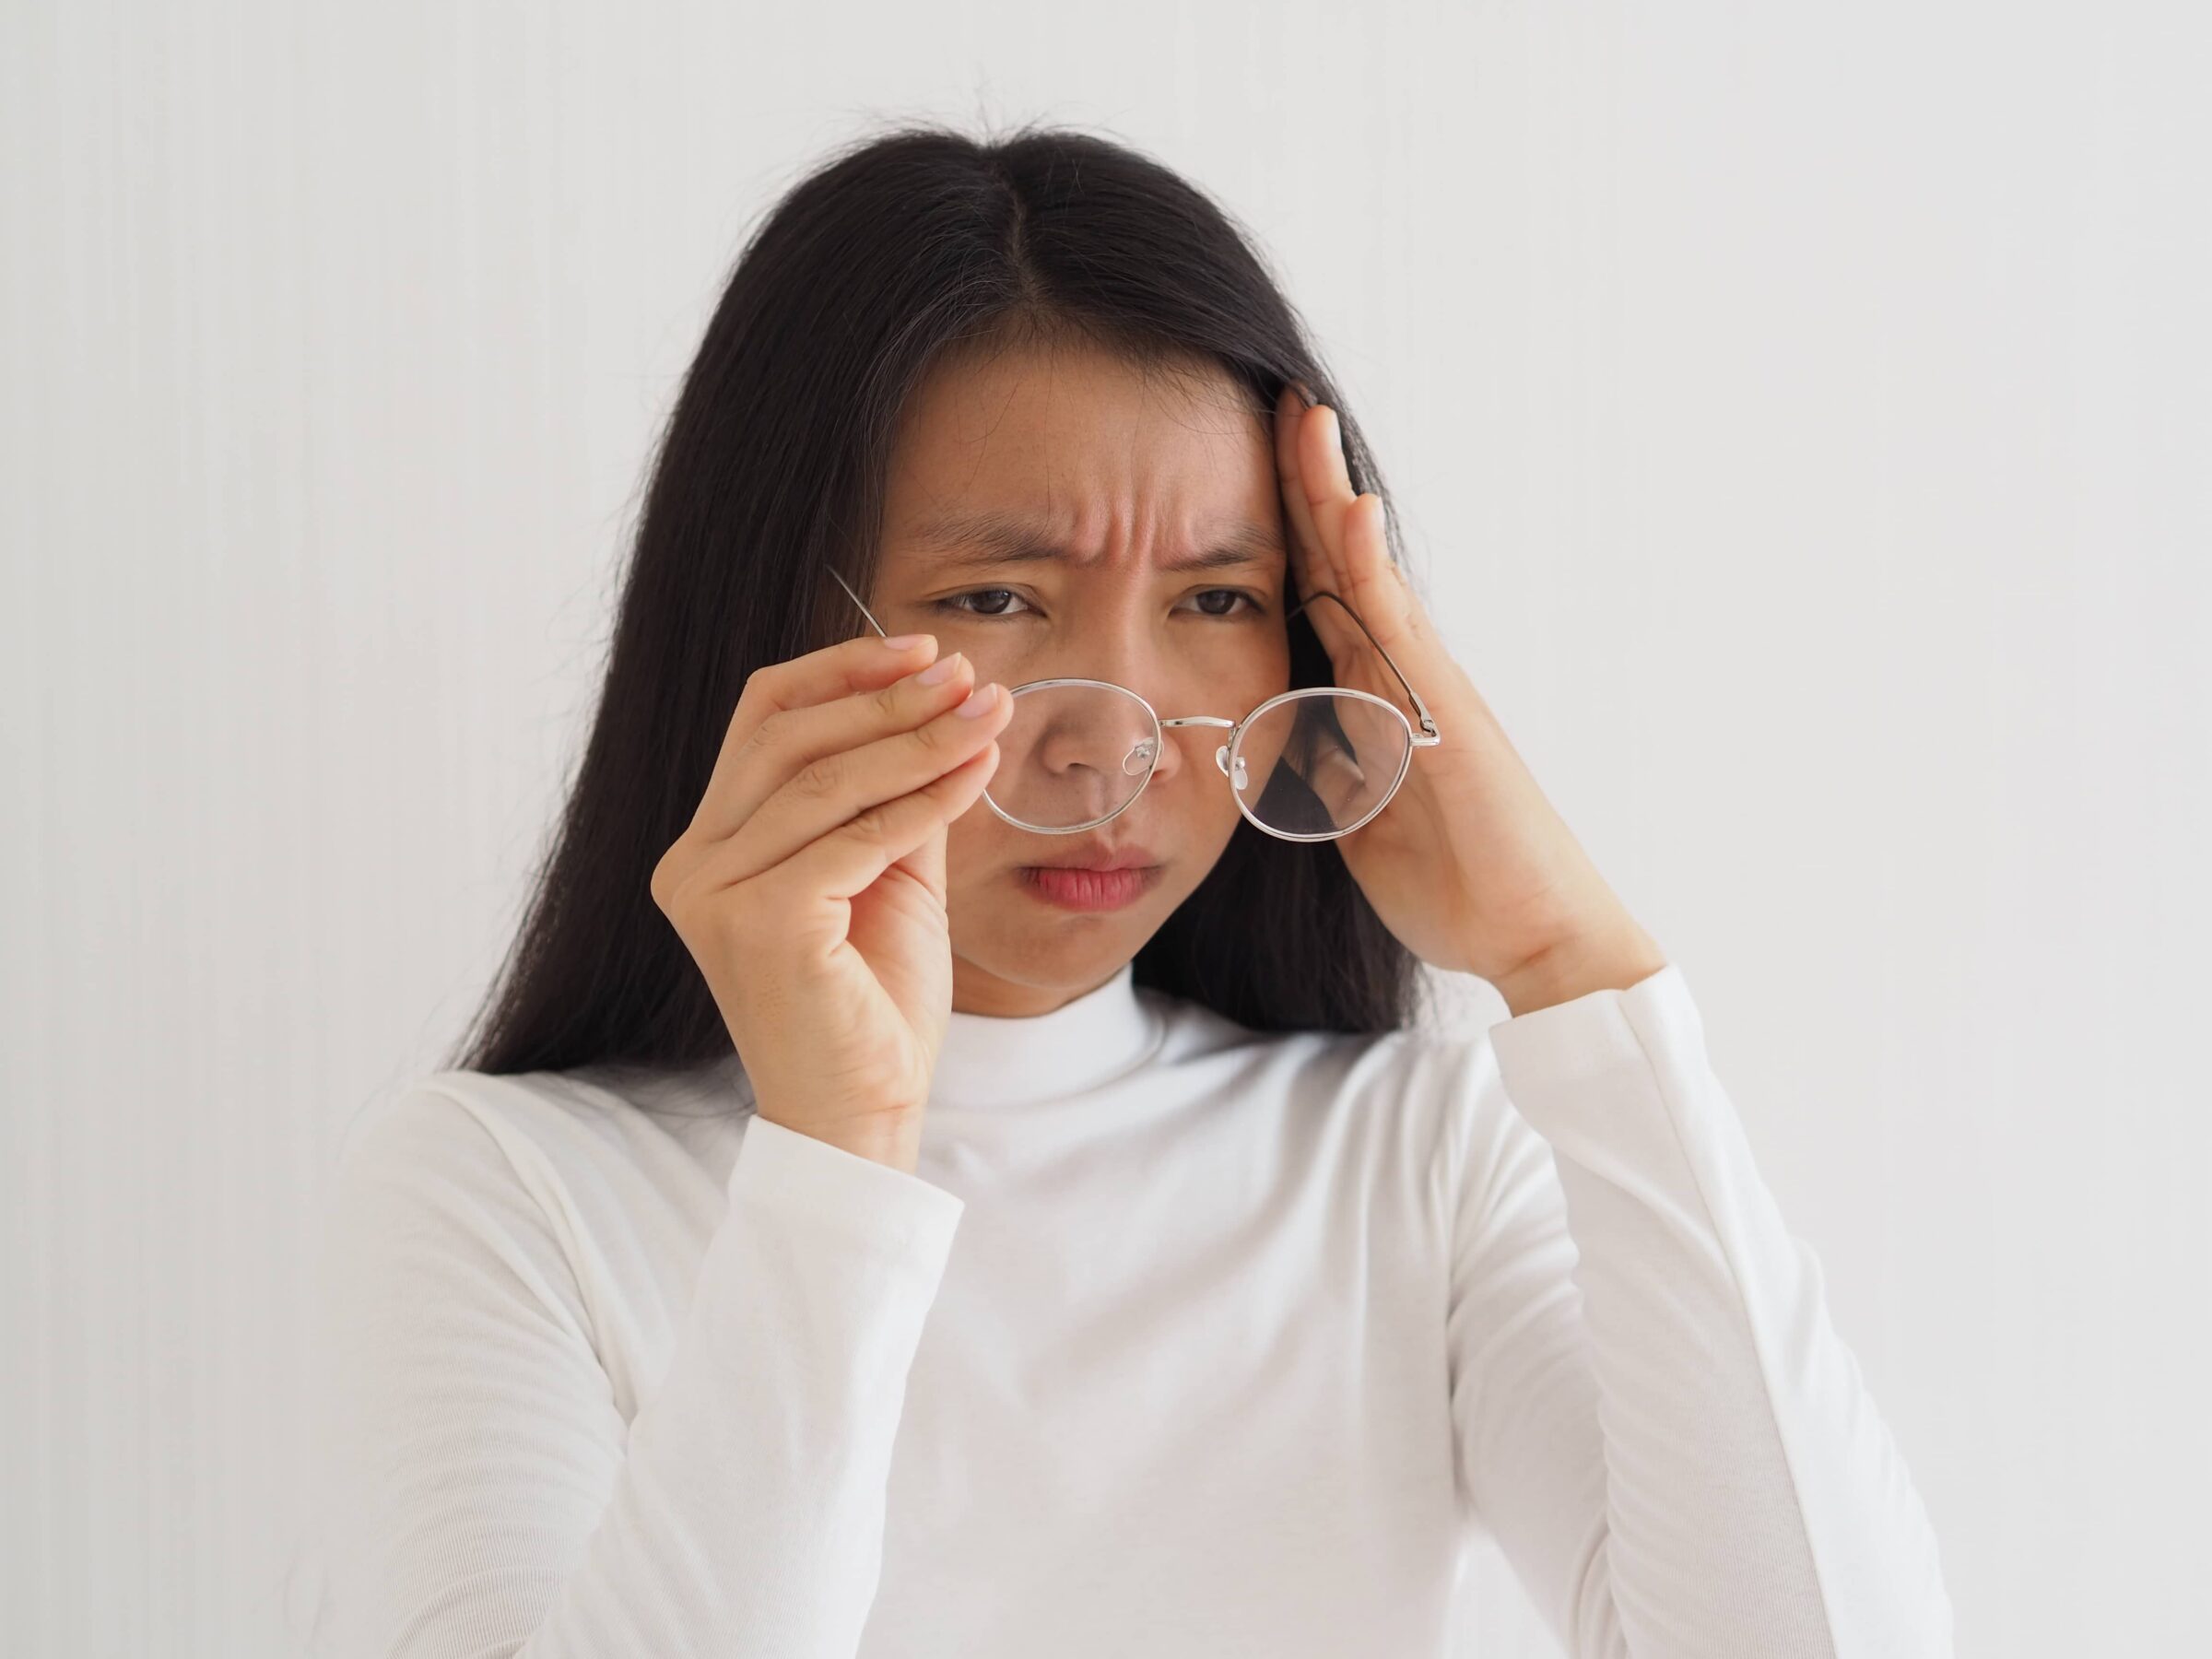 If a person who has had cataract surgery has a swollen cornea, it may take up to three months to determine if the swelling will subside on its own